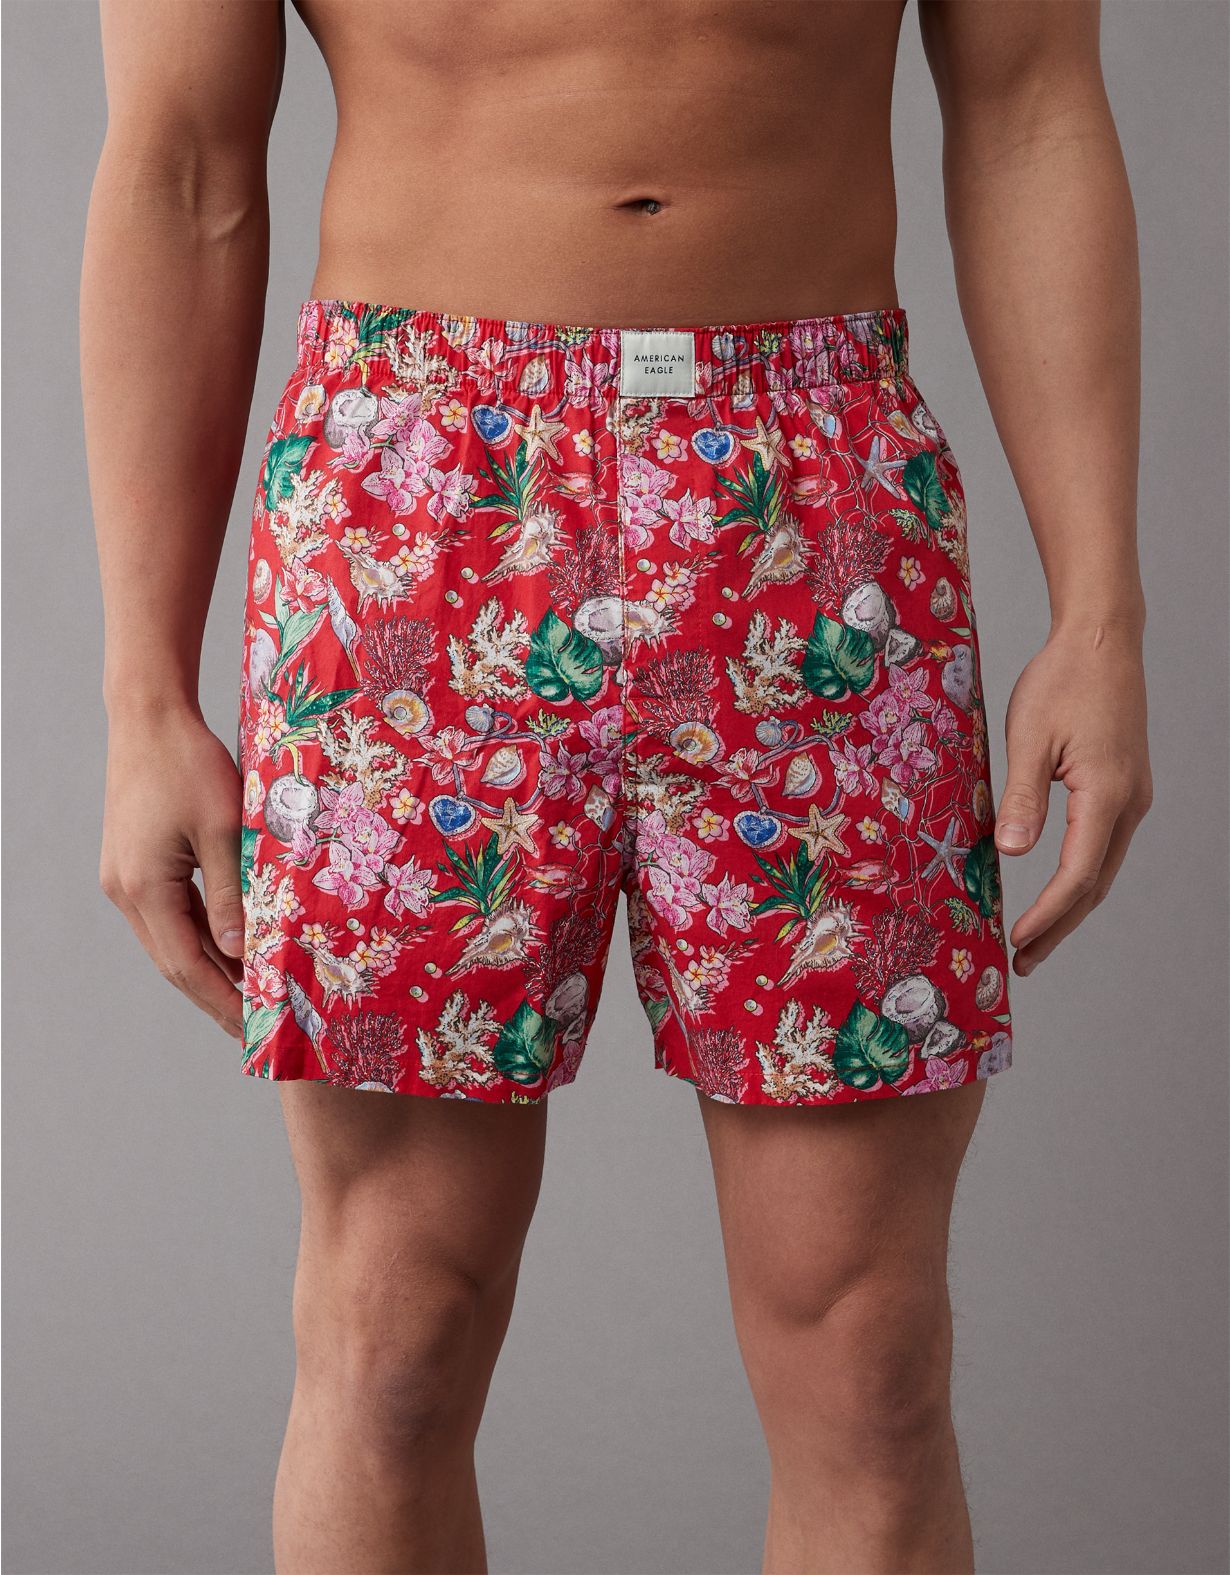 AEO Coral Stretch Boxer Short